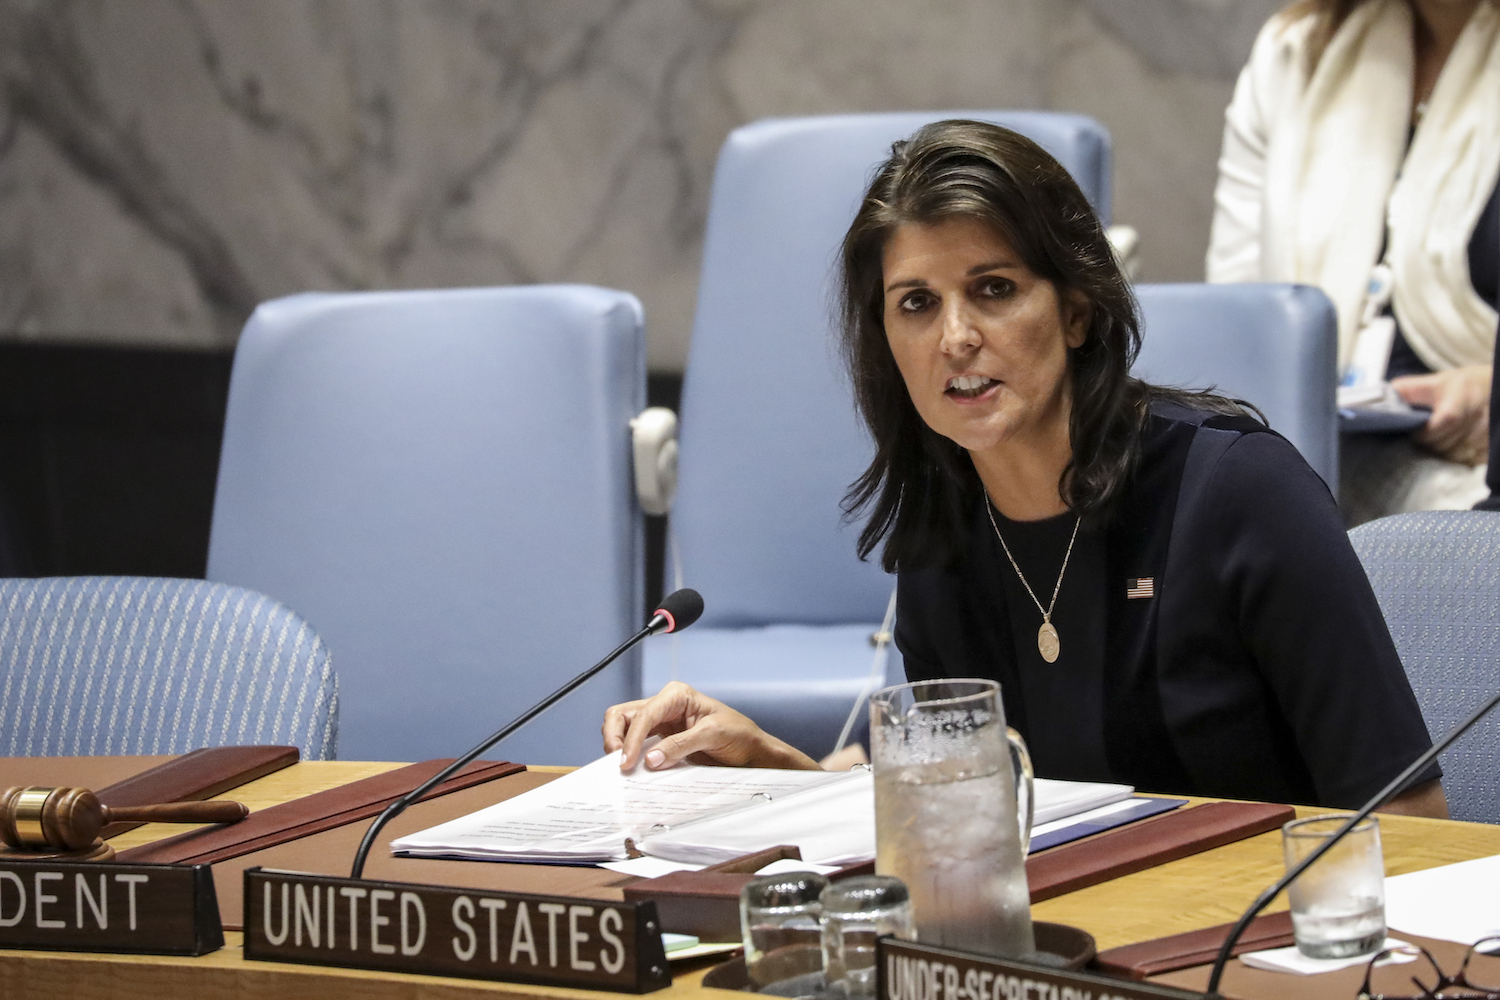 NEW YORK, NY - SEPTEMBER 17: U.S. Ambassador to the U.N. Nikki Haley chairs a meeting of the United Nations Security Council at UN headquarters, September 17, 2018 in New York City. The United States called a meeting of the Security Council to discuss what they call efforts by some members of the of the council to undermine and obstruct U.N. sanctions against North Korea. (Photo by Drew Angerer/Getty Images)